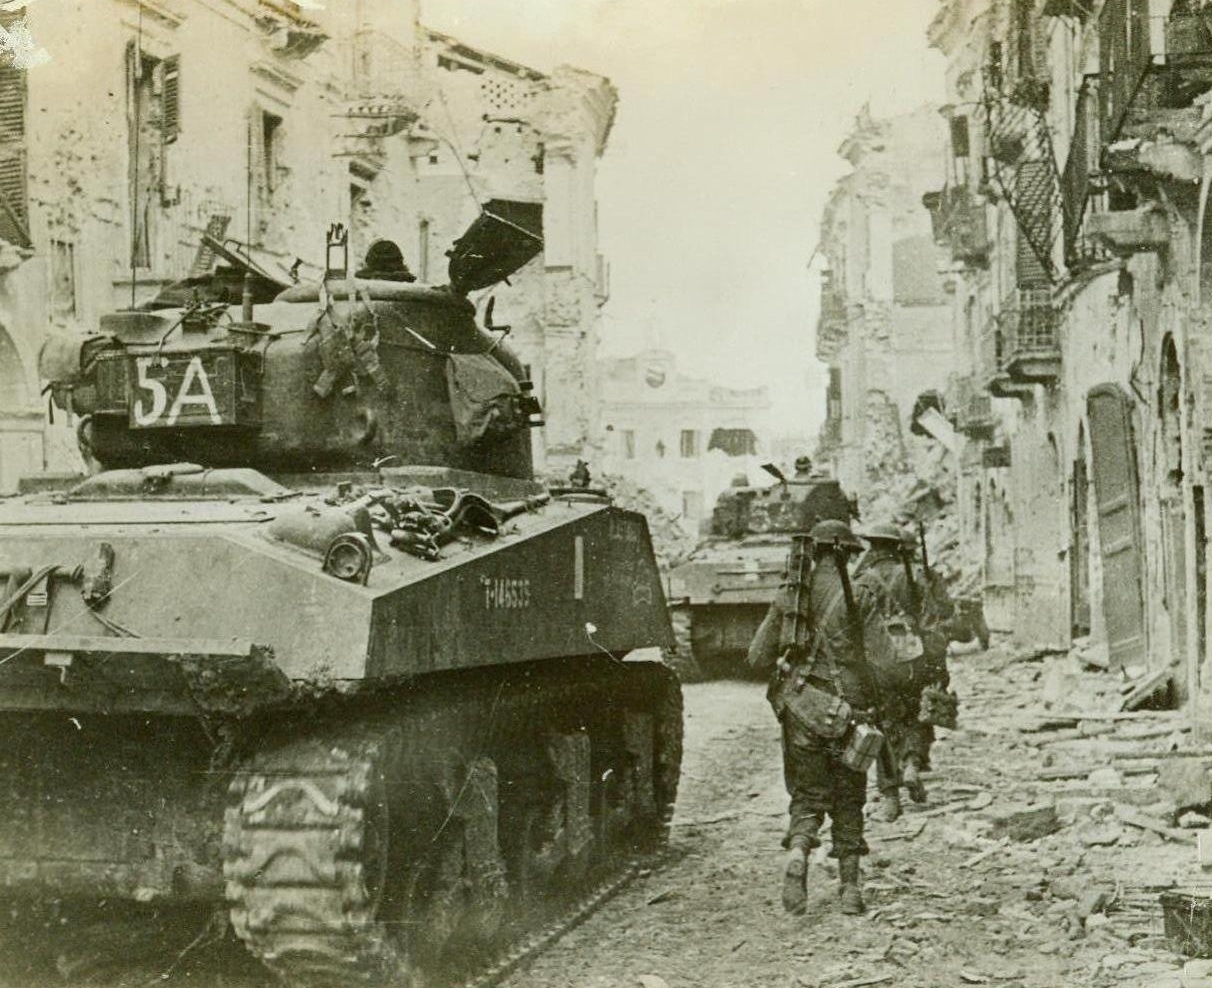 CANADIANS FINISH OFF NAZIS IN ORTONA, 1/20/1944. ORTONA, ITALY – Canadian tanks and infantrymen advance through the battered streets of Ortona, Italy, for the last phase of five days of bitter street fighting to wrest the Adriatic coastal town from German control. Dead Nazis, which littered the streets, were identified as belonging to enemy paratroop regiments. Credit Line (ACME);